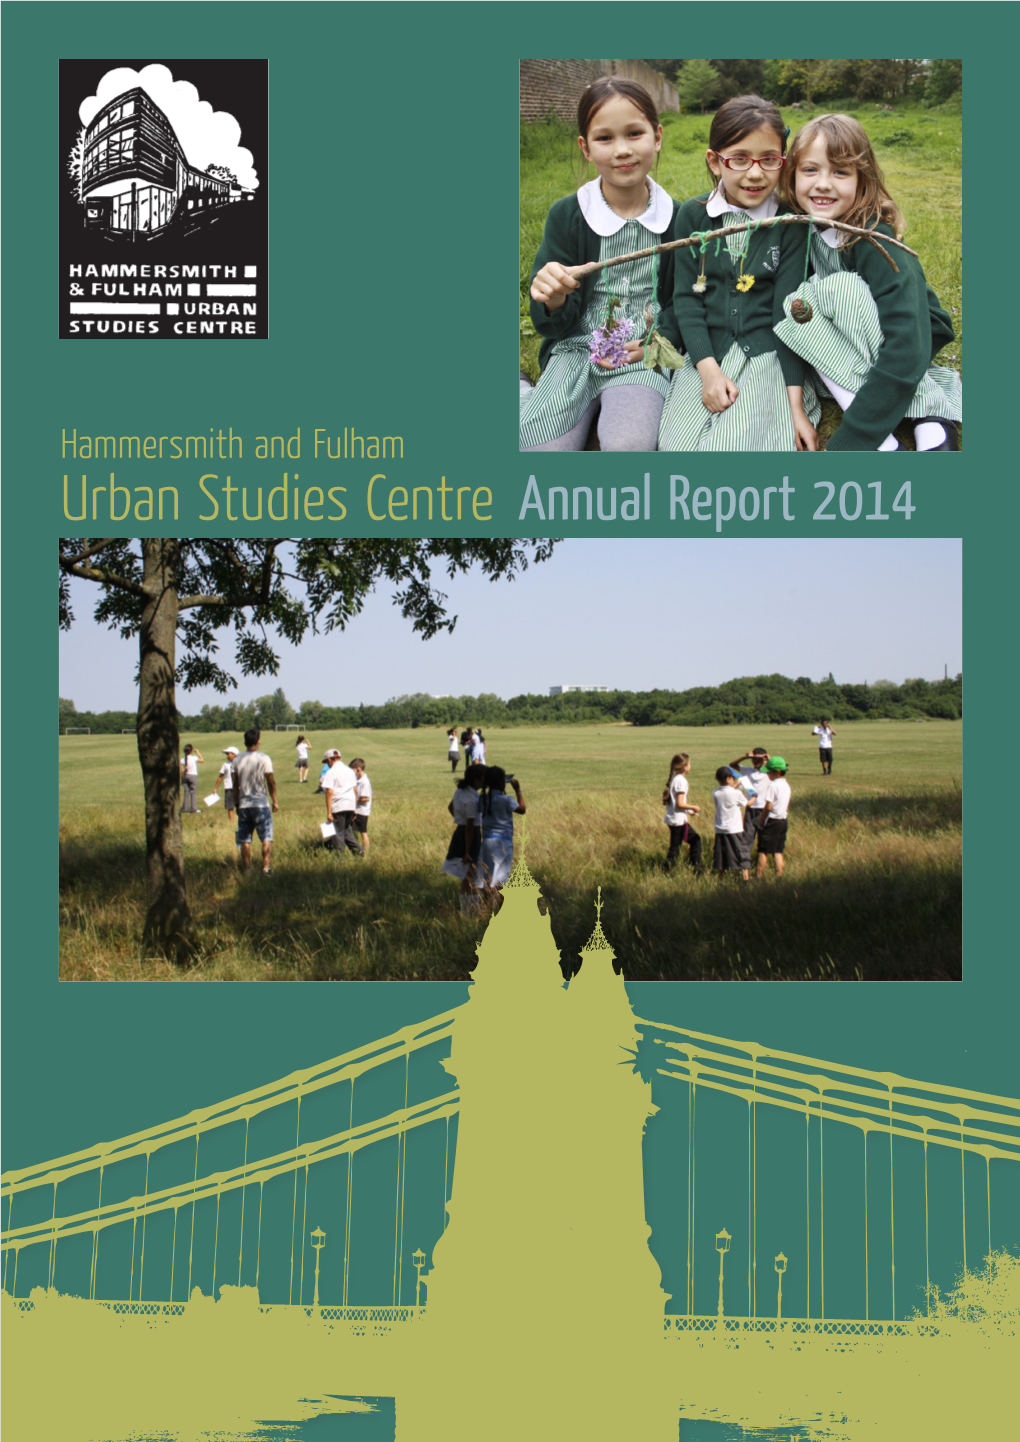 Annual Report 2014 About Urban Studies